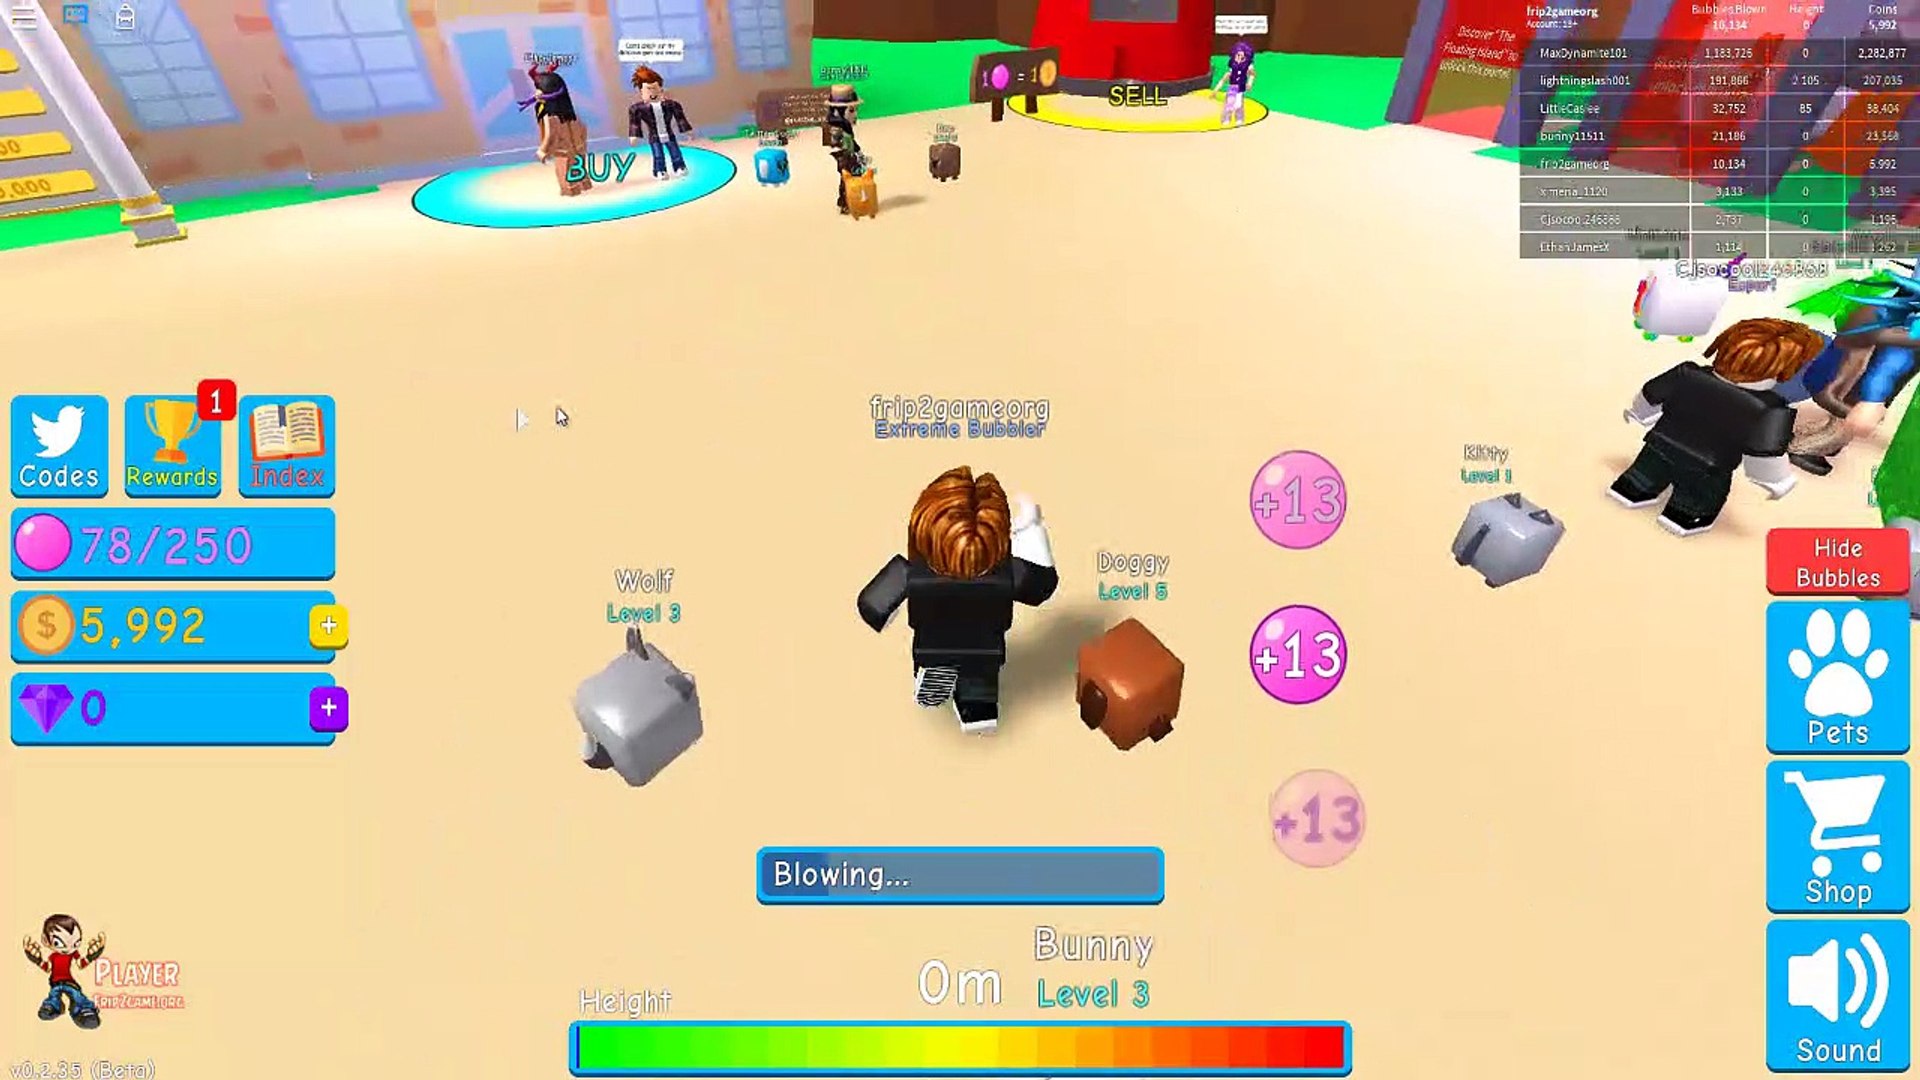 5 Codes Bubble Gum Simulator Roblox Video Dailymotion - code for twitter bird roblox candy simulator